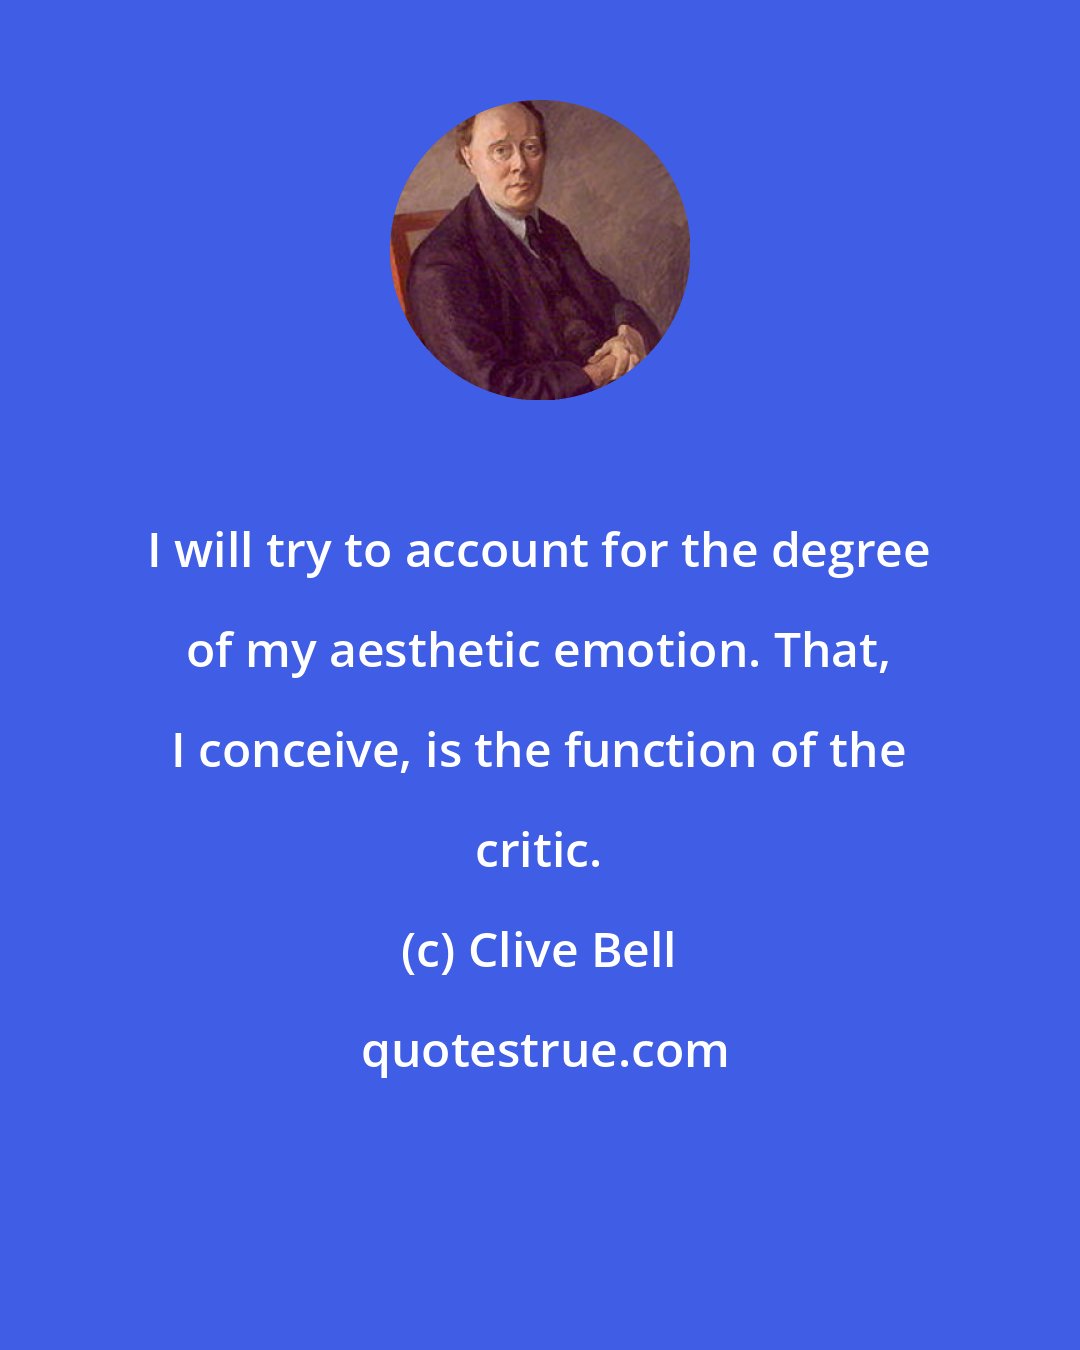 Clive Bell: I will try to account for the degree of my aesthetic emotion. That, I conceive, is the function of the critic.